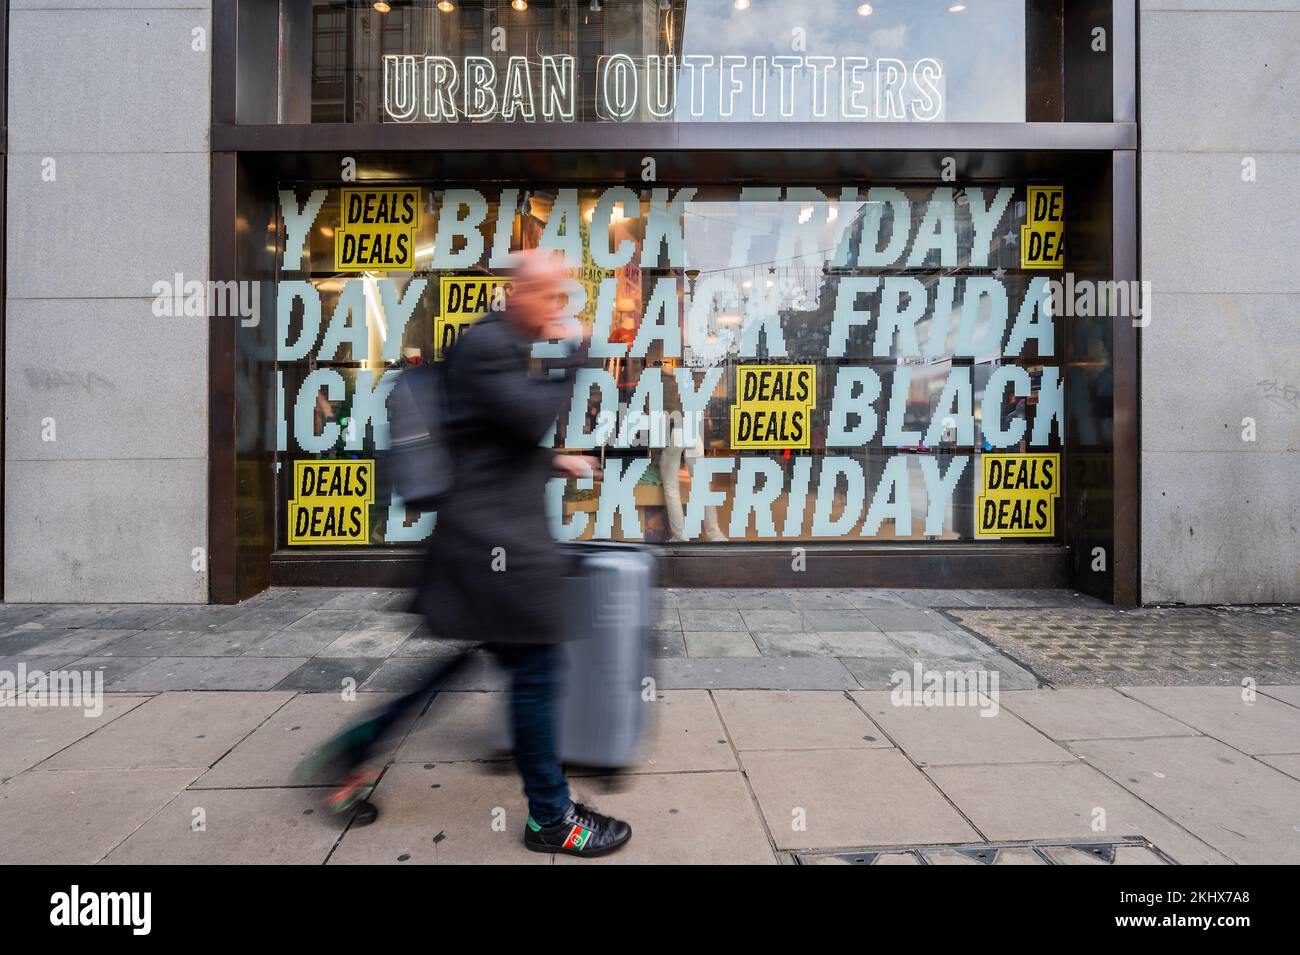 London, UK. 24th Nov, 2022. Black friday deals at Urban Outfitters' flagship store in Oxford Street. Credit: Guy Bell/Alamy Live News Stock Photo